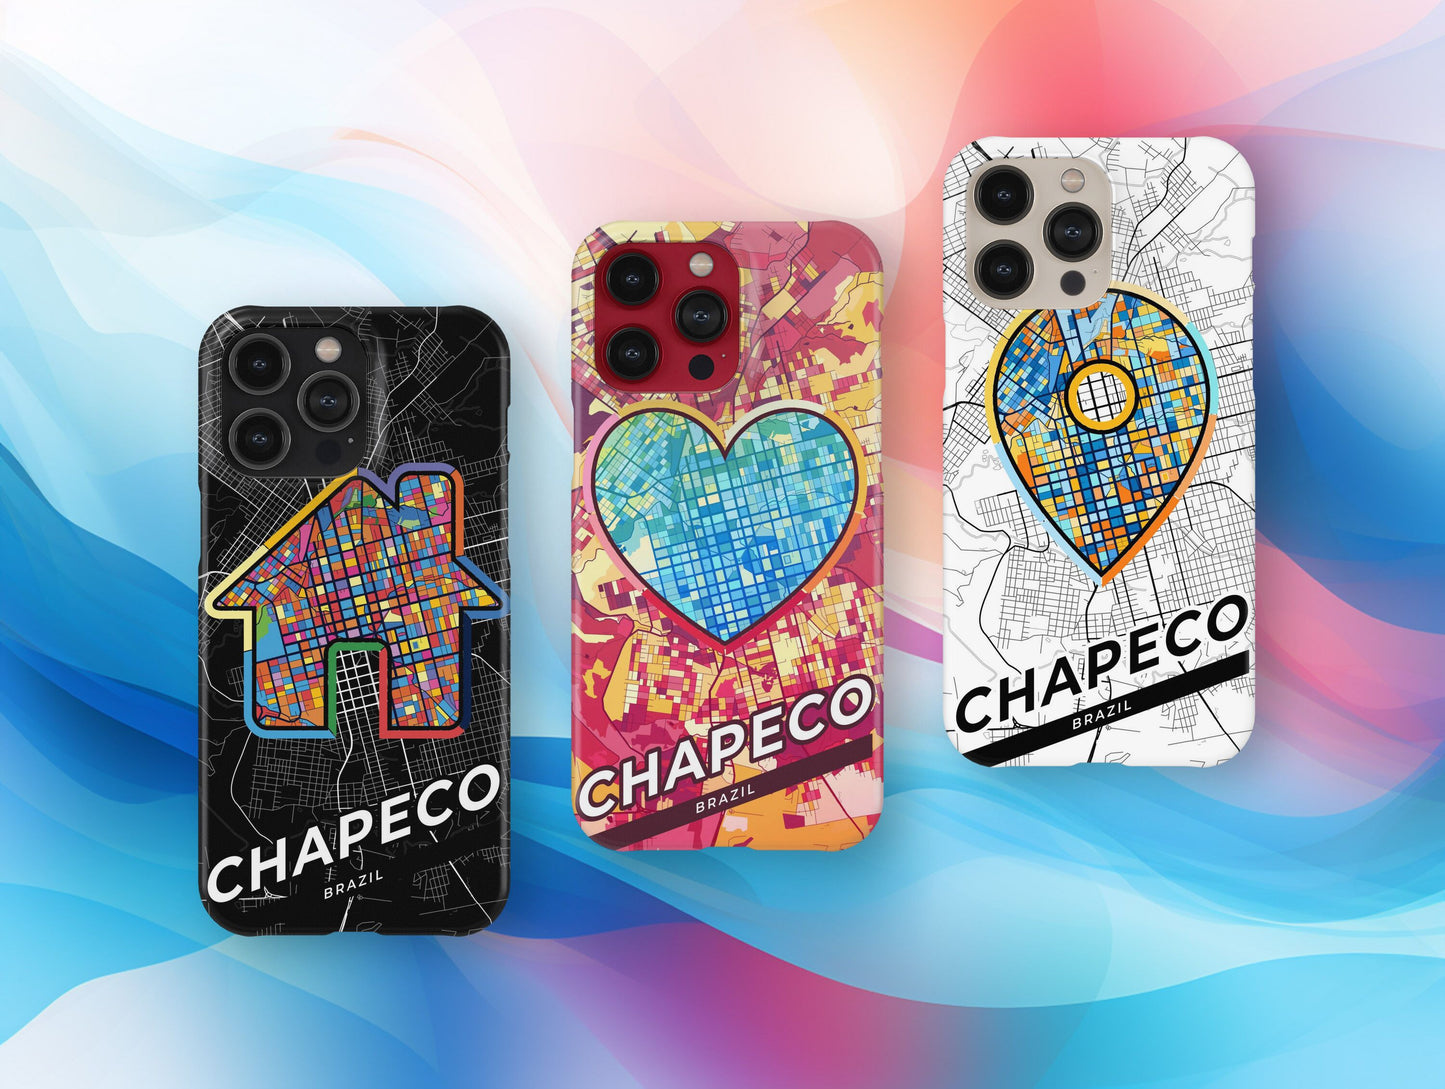 Chapeco Brazil slim phone case with colorful icon. Birthday, wedding or housewarming gift. Couple match cases.